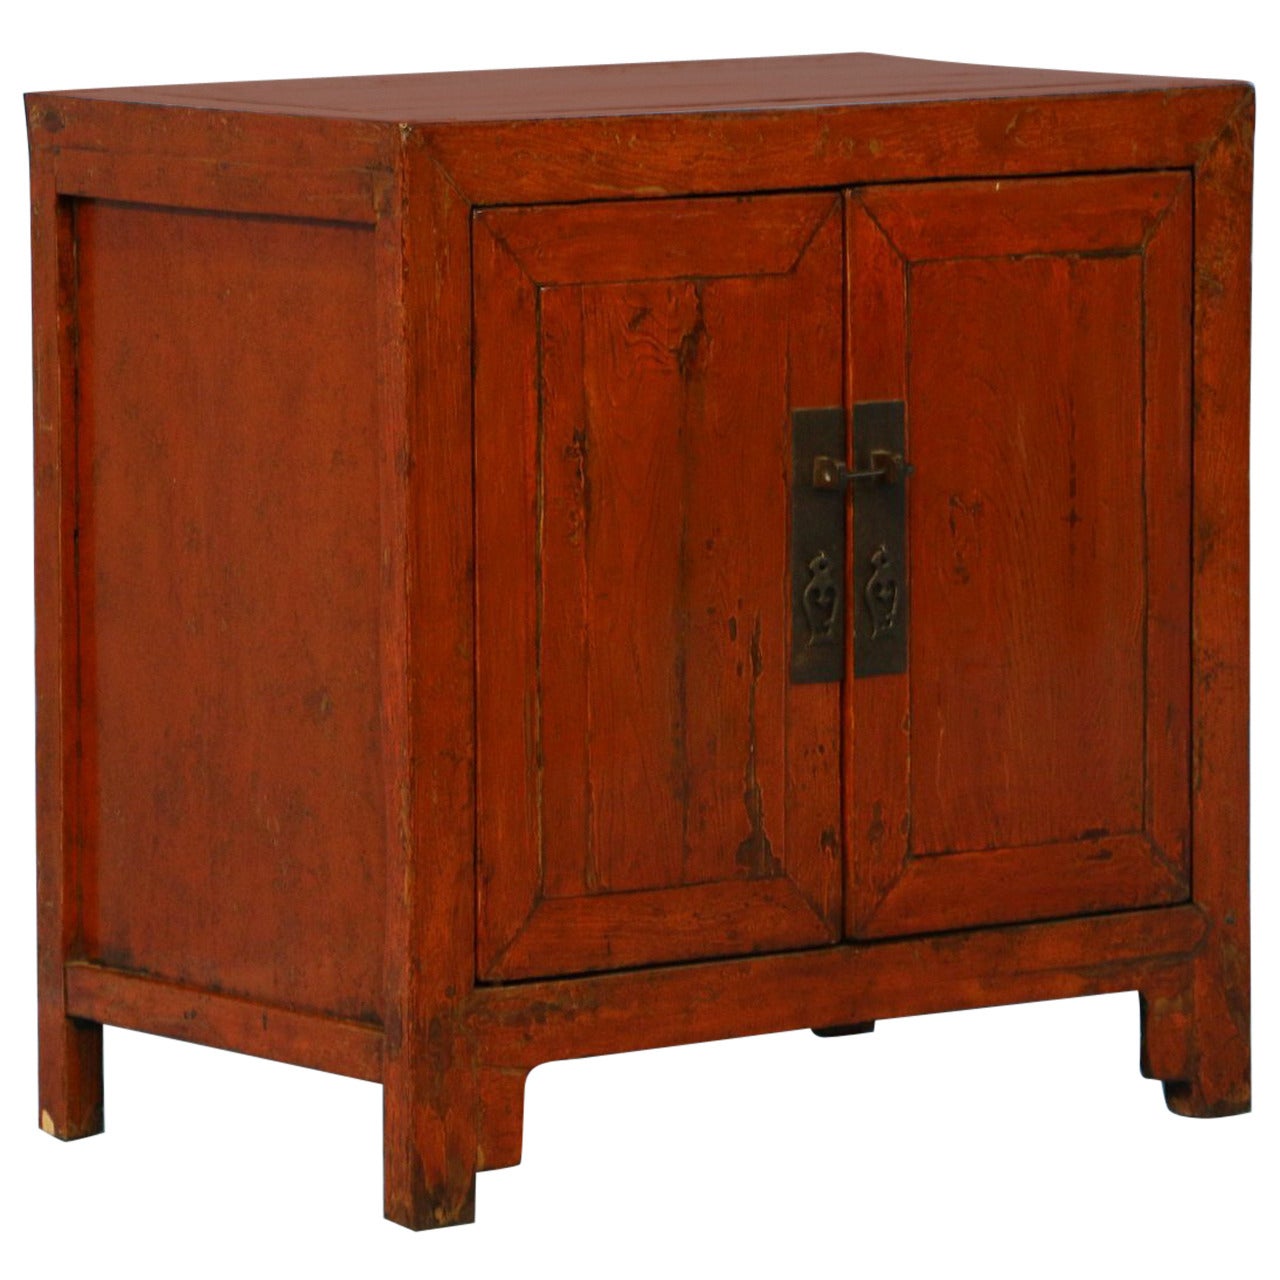 Antique Original Red Painted Chinese Lacquered Sideboard, Circa 1850-70